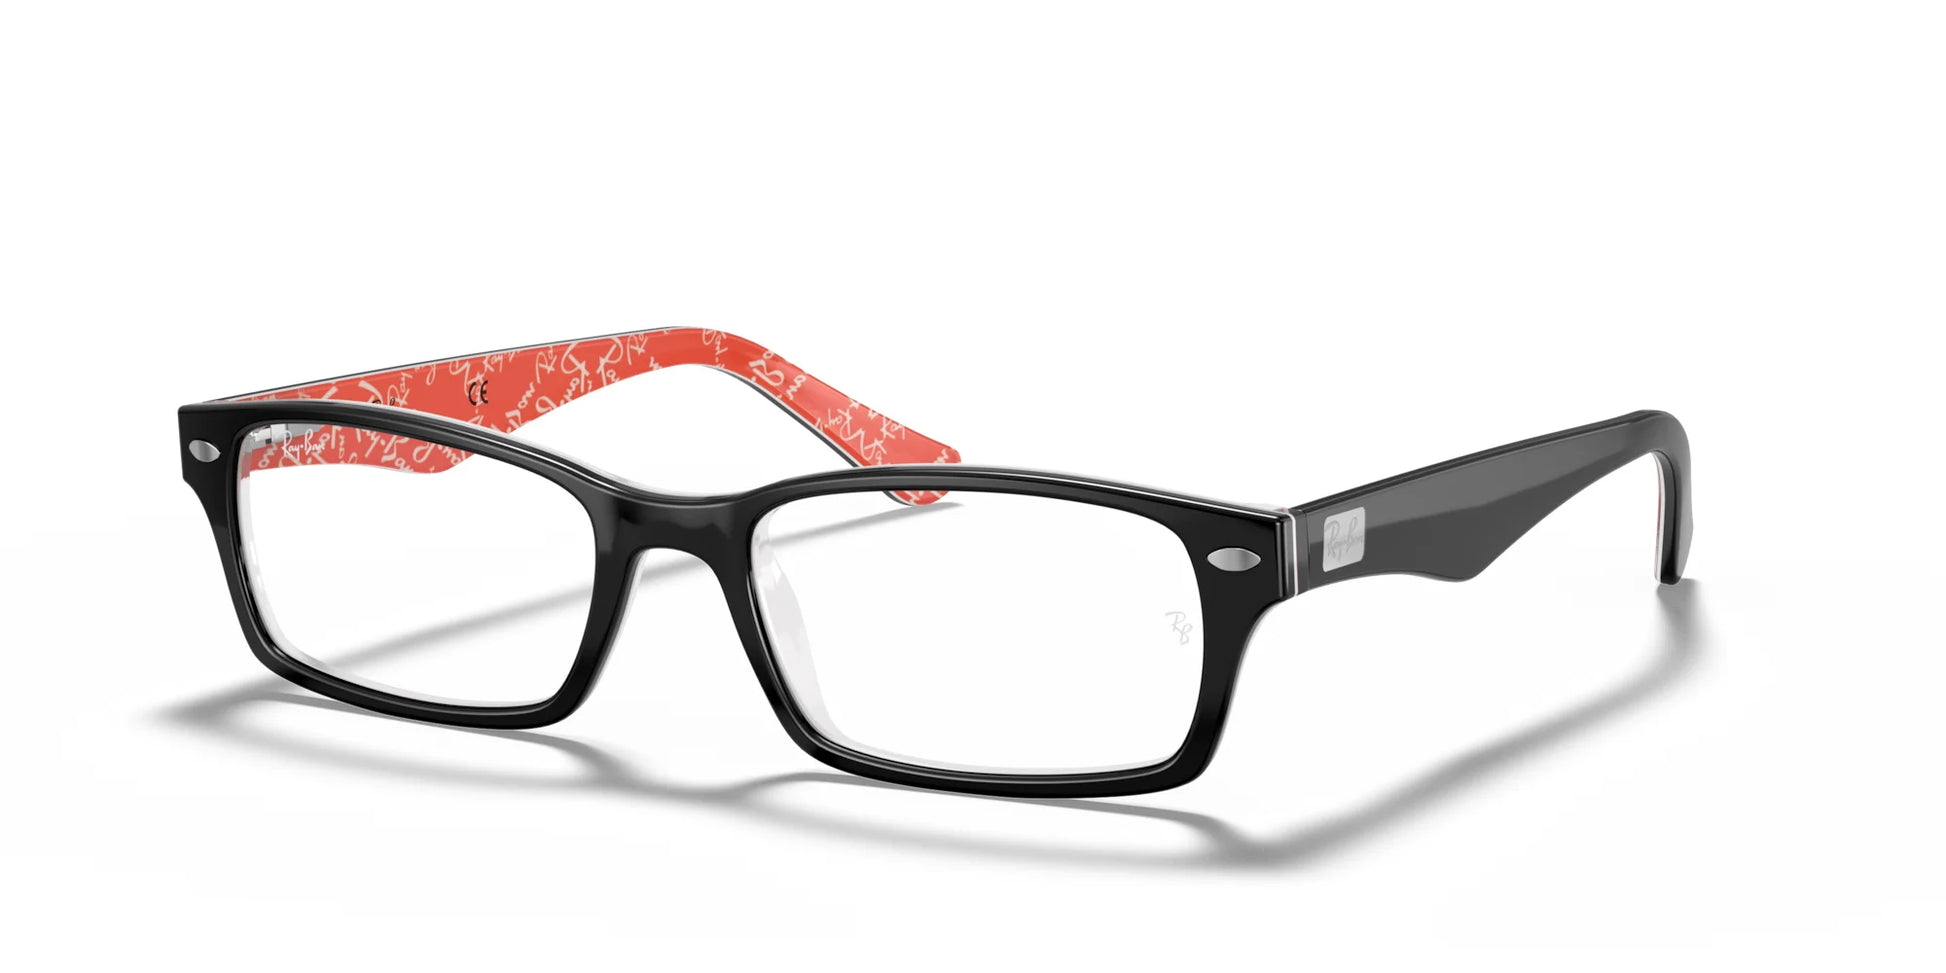 Ray-Ban RX5206 Eyeglasses Black On Red / Clear